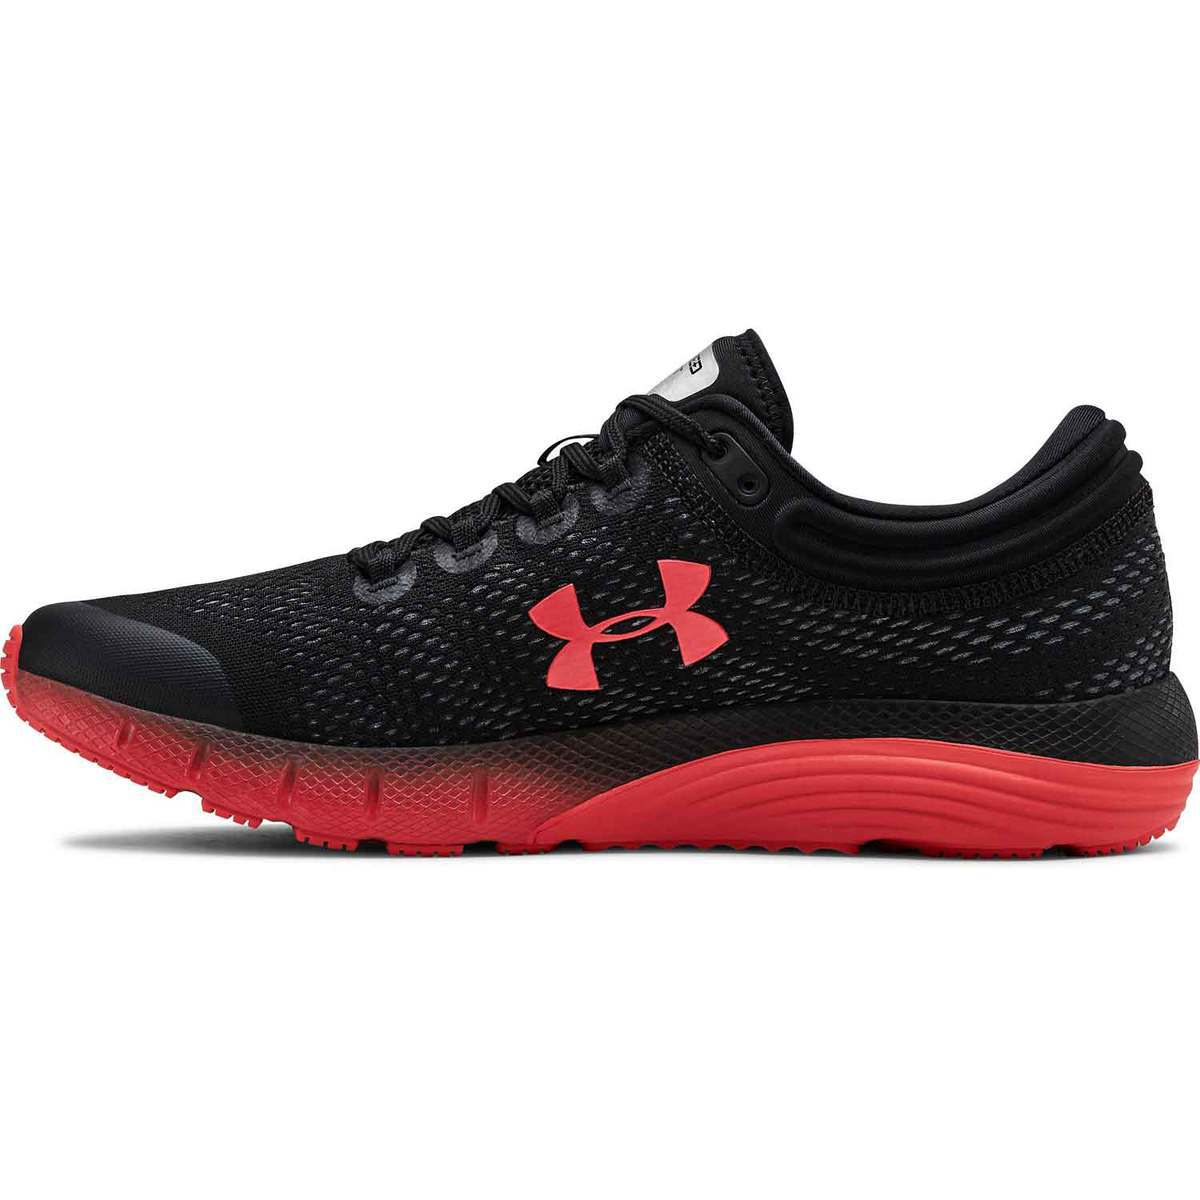 Under Armour Men's Charged Bandit 5 Running Shoes - Black - Size 10.5 ...